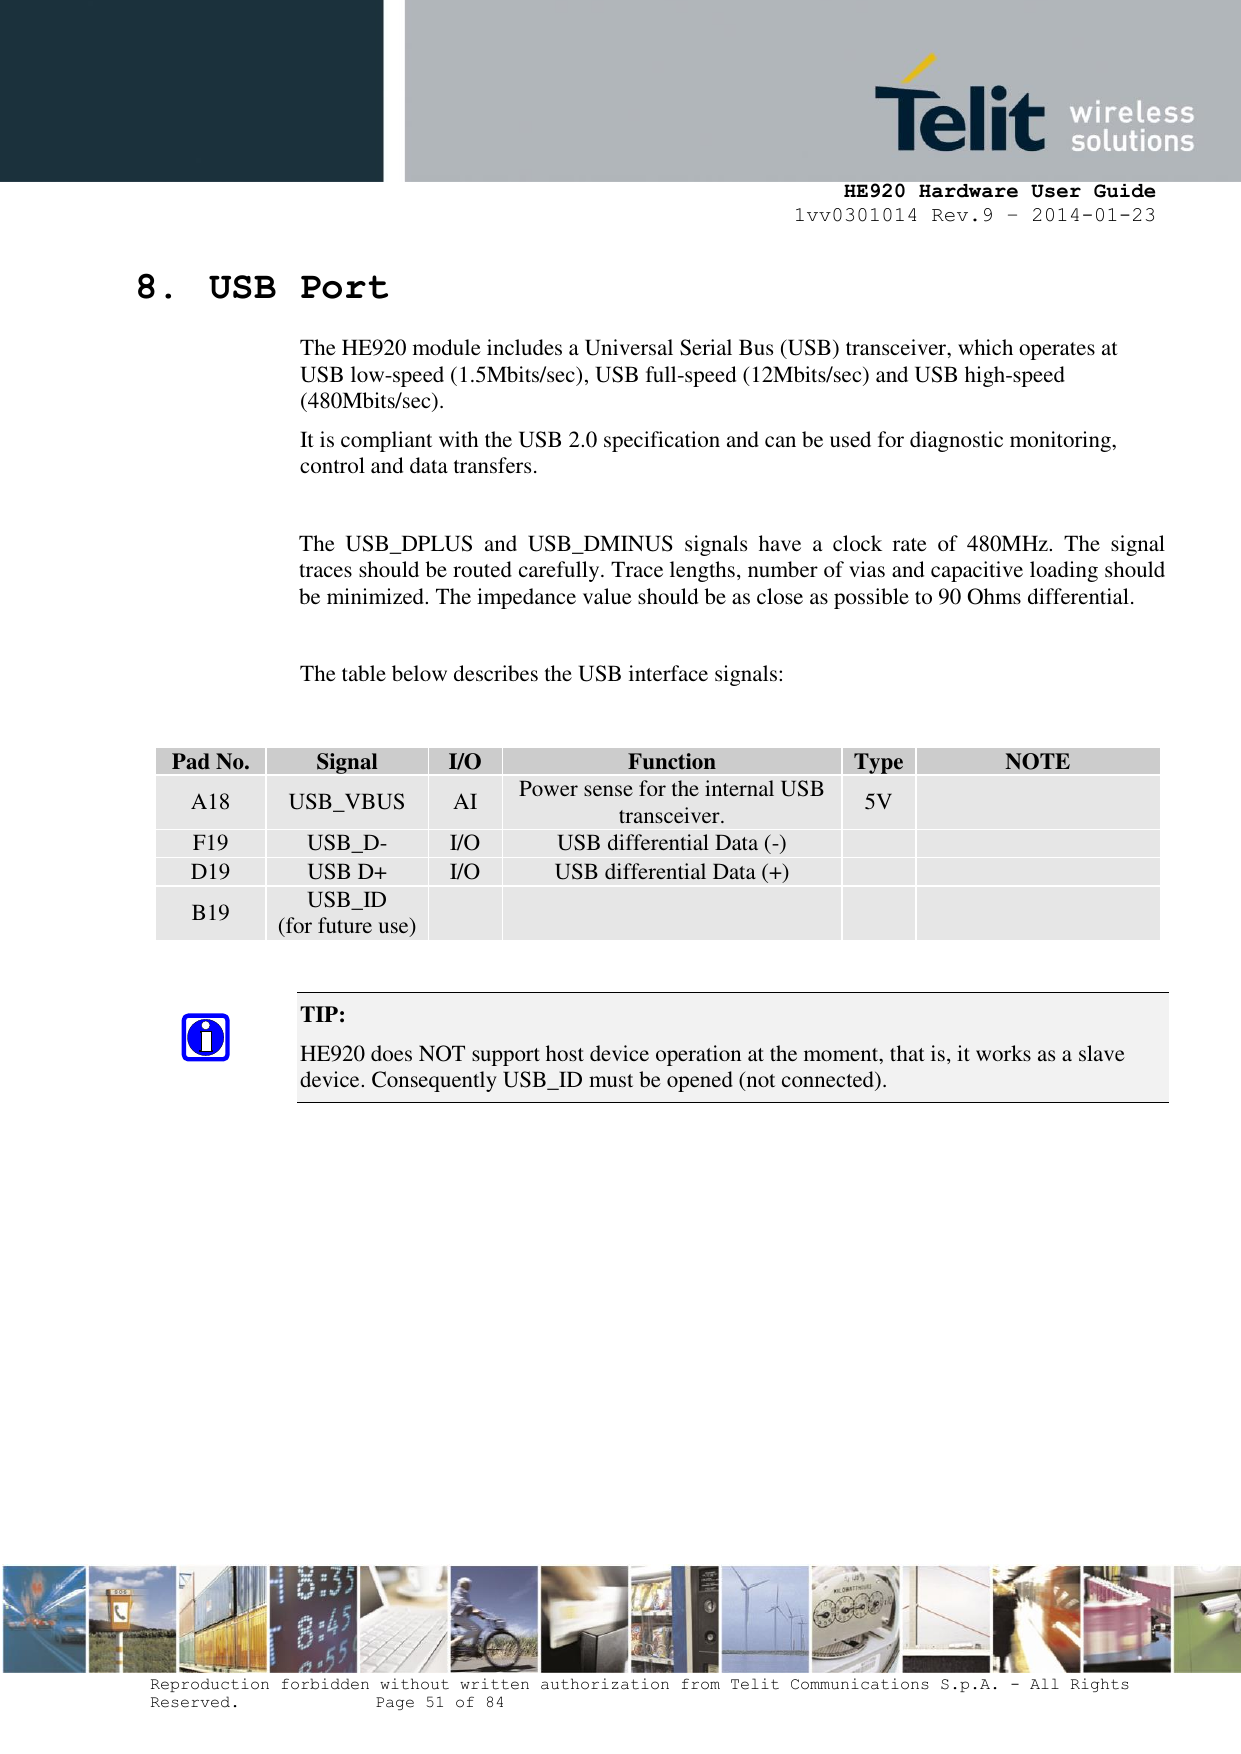     HE920 Hardware User Guide 1vv0301014 Rev.9 – 2014-01-23 Reproduction forbidden without written authorization from Telit Communications S.p.A. - All Rights Reserved.    Page 51 of 84  8. USB Port The HE920 module includes a Universal Serial Bus (USB) transceiver, which operates at USB low-speed (1.5Mbits/sec), USB full-speed (12Mbits/sec) and USB high-speed (480Mbits/sec). It is compliant with the USB 2.0 specification and can be used for diagnostic monitoring, control and data transfers.  The  USB_DPLUS  and  USB_DMINUS  signals  have  a  clock  rate  of  480MHz.  The  signal traces should be routed carefully. Trace lengths, number of vias and capacitive loading should be minimized. The impedance value should be as close as possible to 90 Ohms differential.  The table below describes the USB interface signals:   TIP:  HE920 does NOT support host device operation at the moment, that is, it works as a slave device. Consequently USB_ID must be opened (not connected).   Pad No. Signal I/O Function Type NOTE A18 USB_VBUS AI Power sense for the internal USB transceiver. 5V  F19 USB_D- I/O USB differential Data (-)   D19 USB D+ I/O USB differential Data (+)   B19 USB_ID (for future use)     